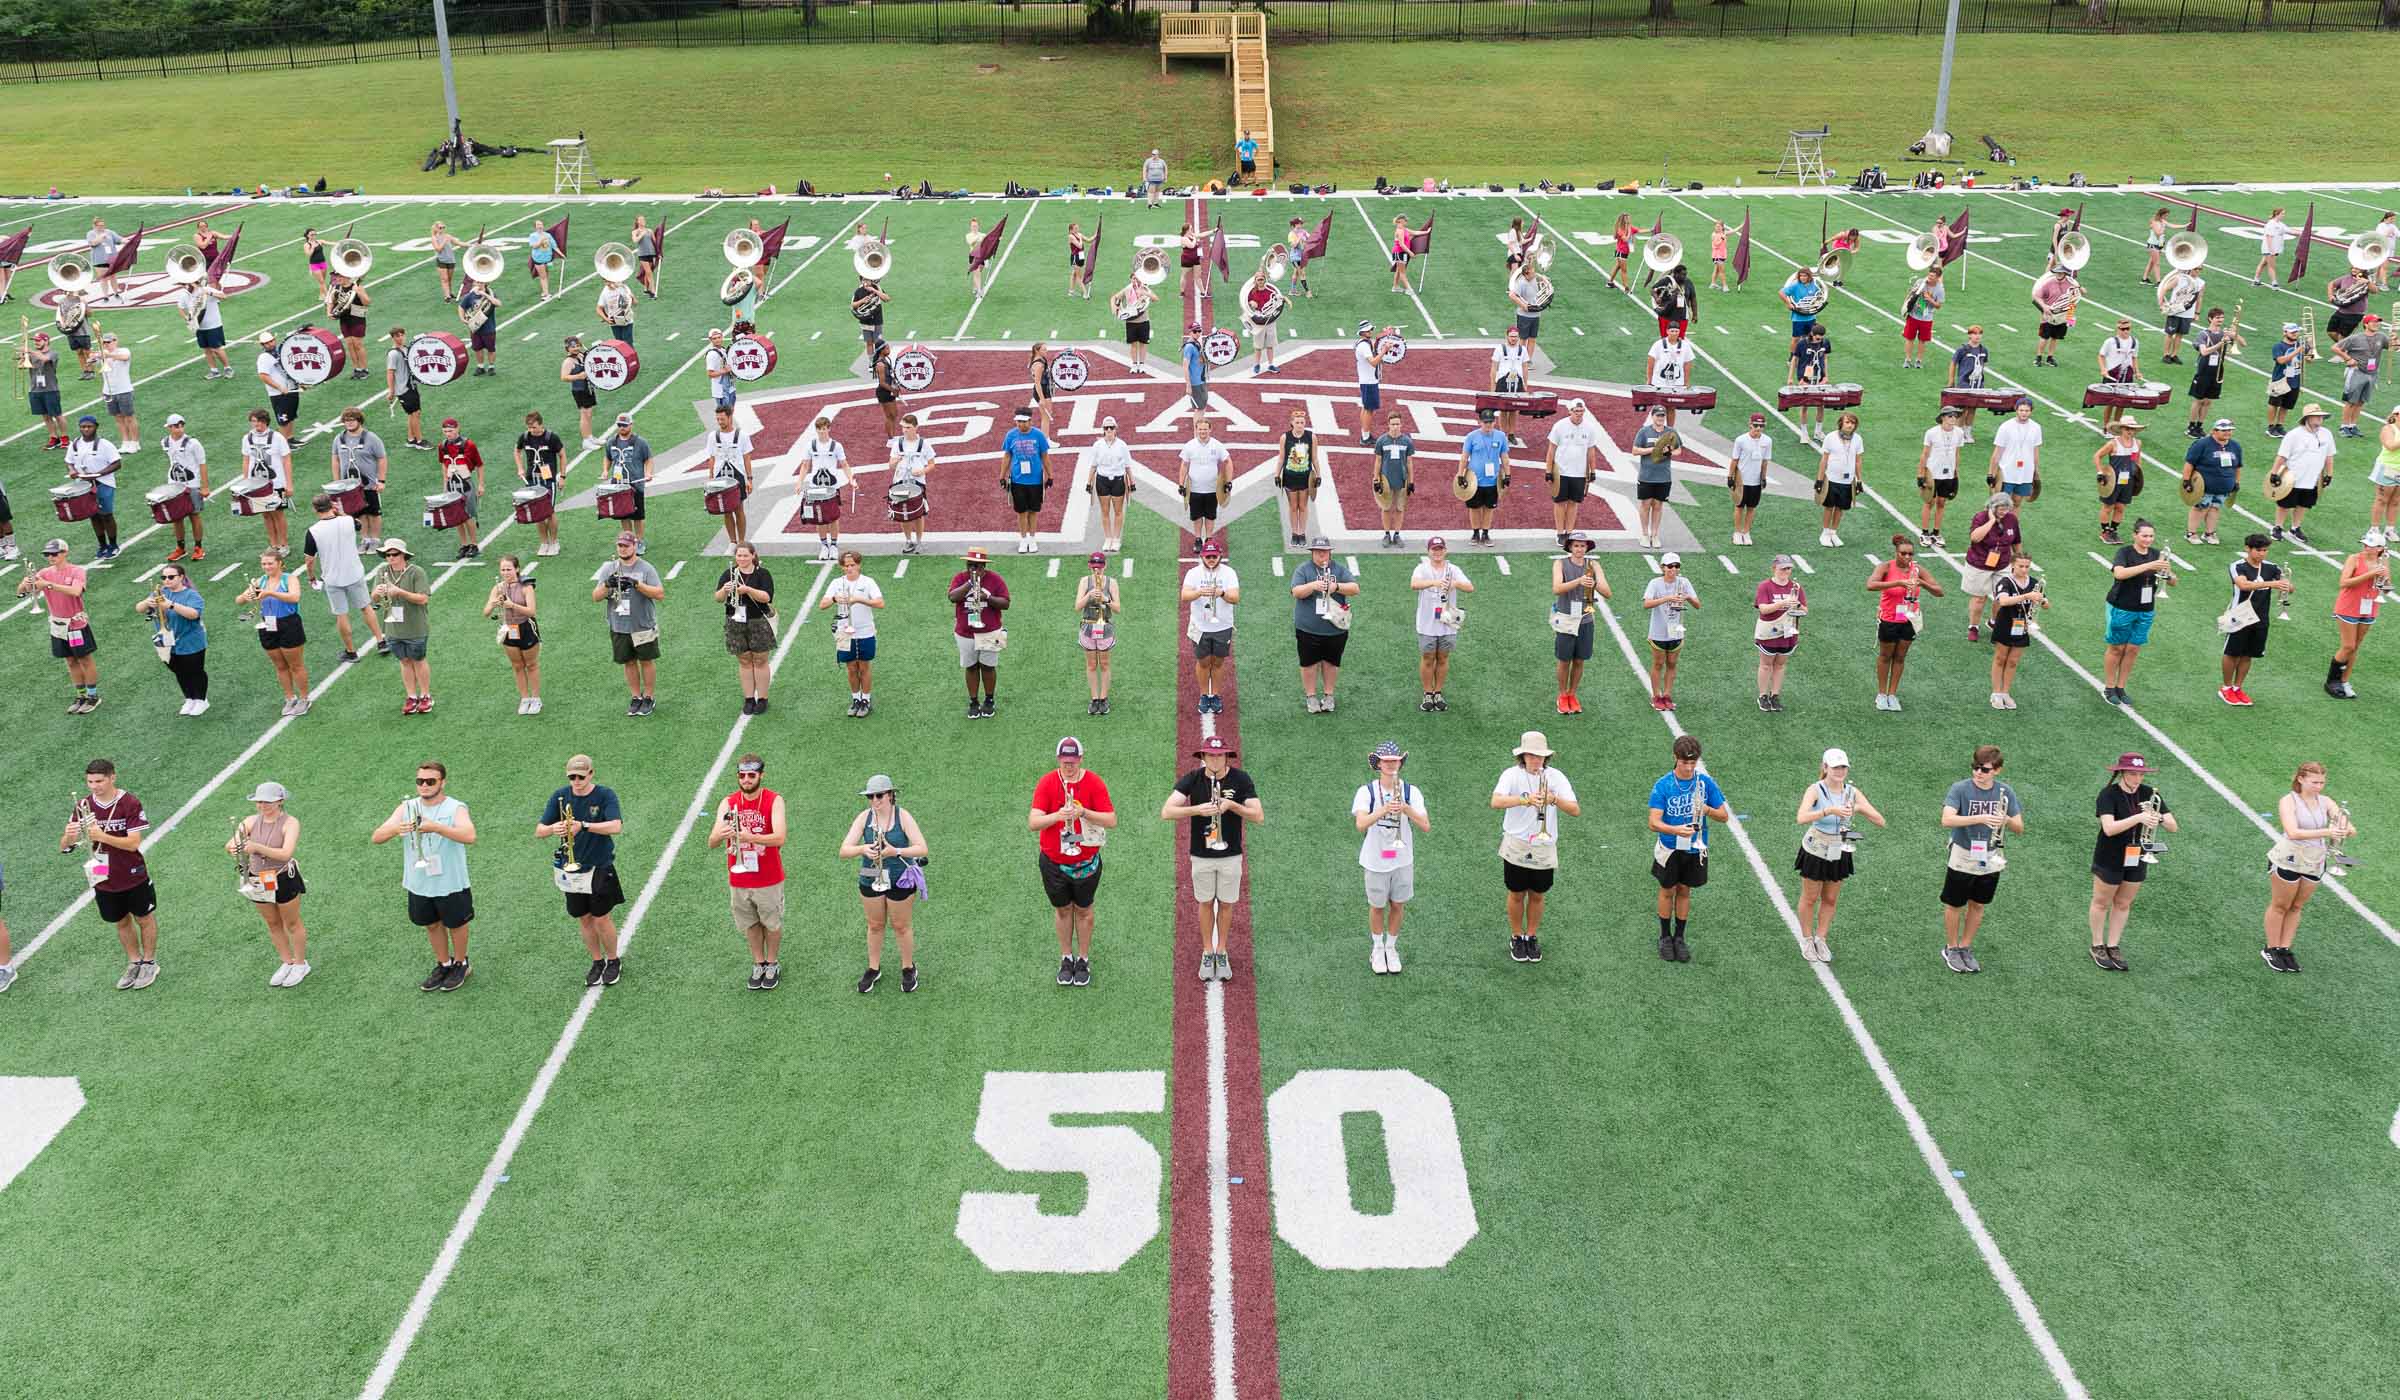 Marching band member stand0 in formation on the practice field